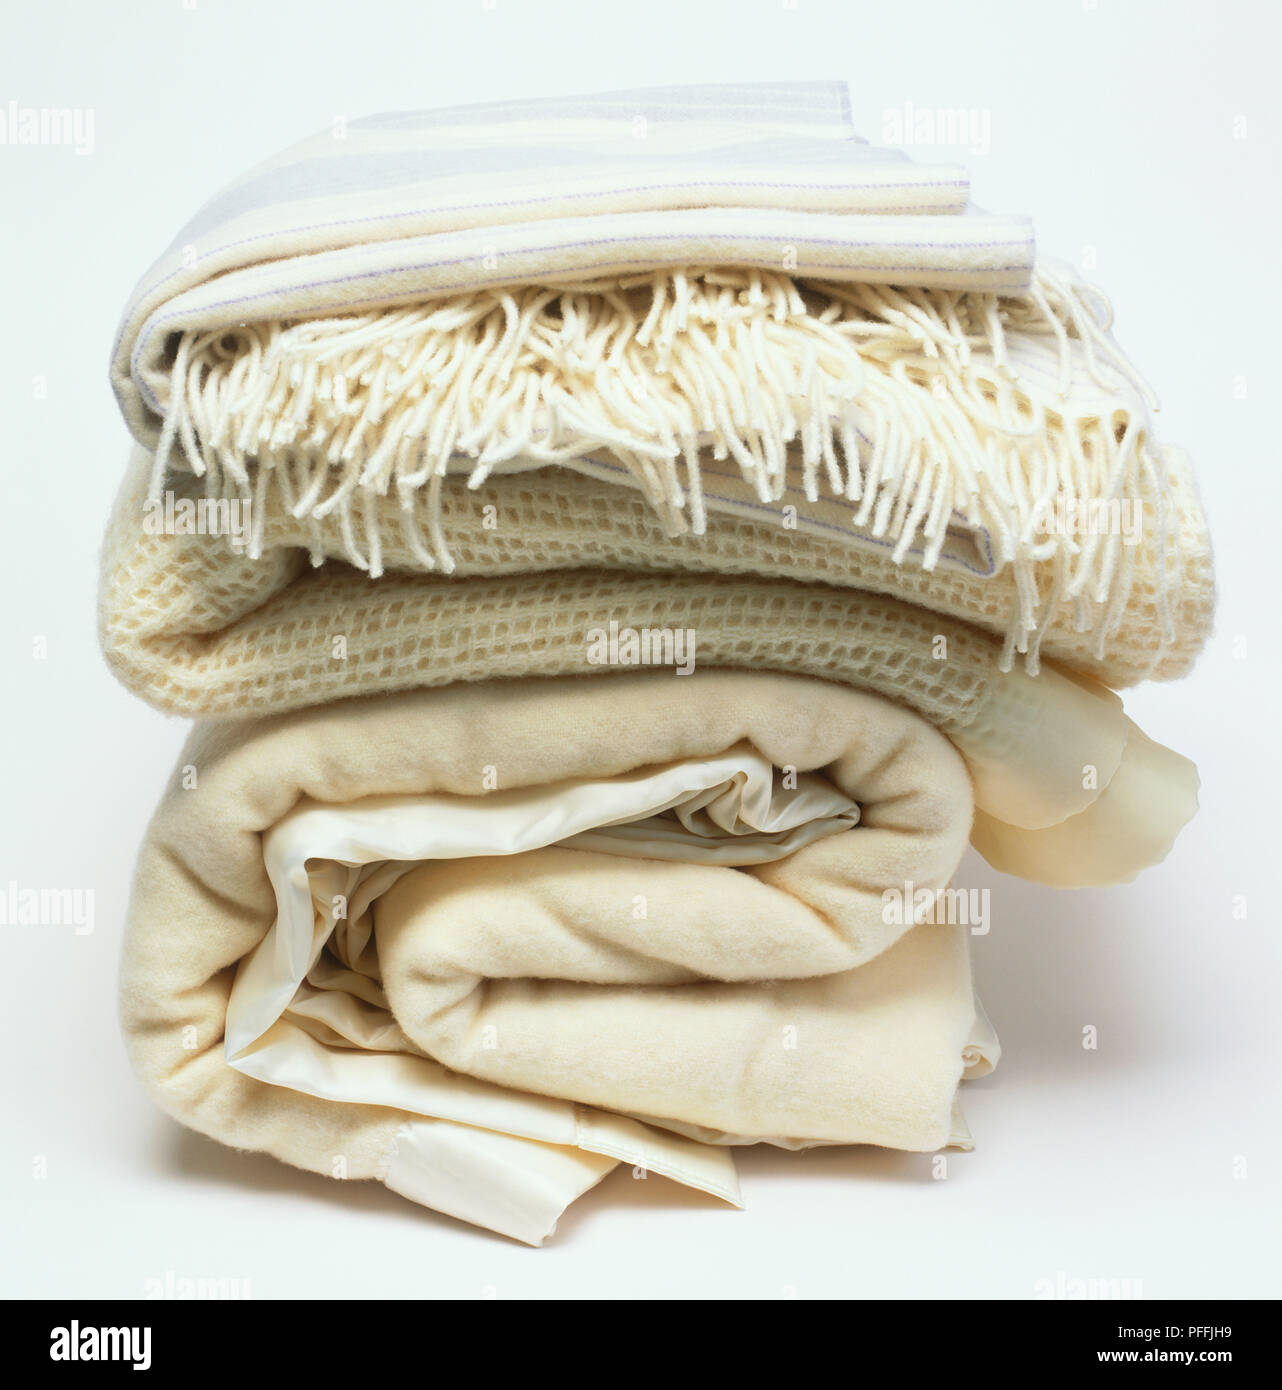 Pile of folded wool blankets and throws, side view Stock Photo